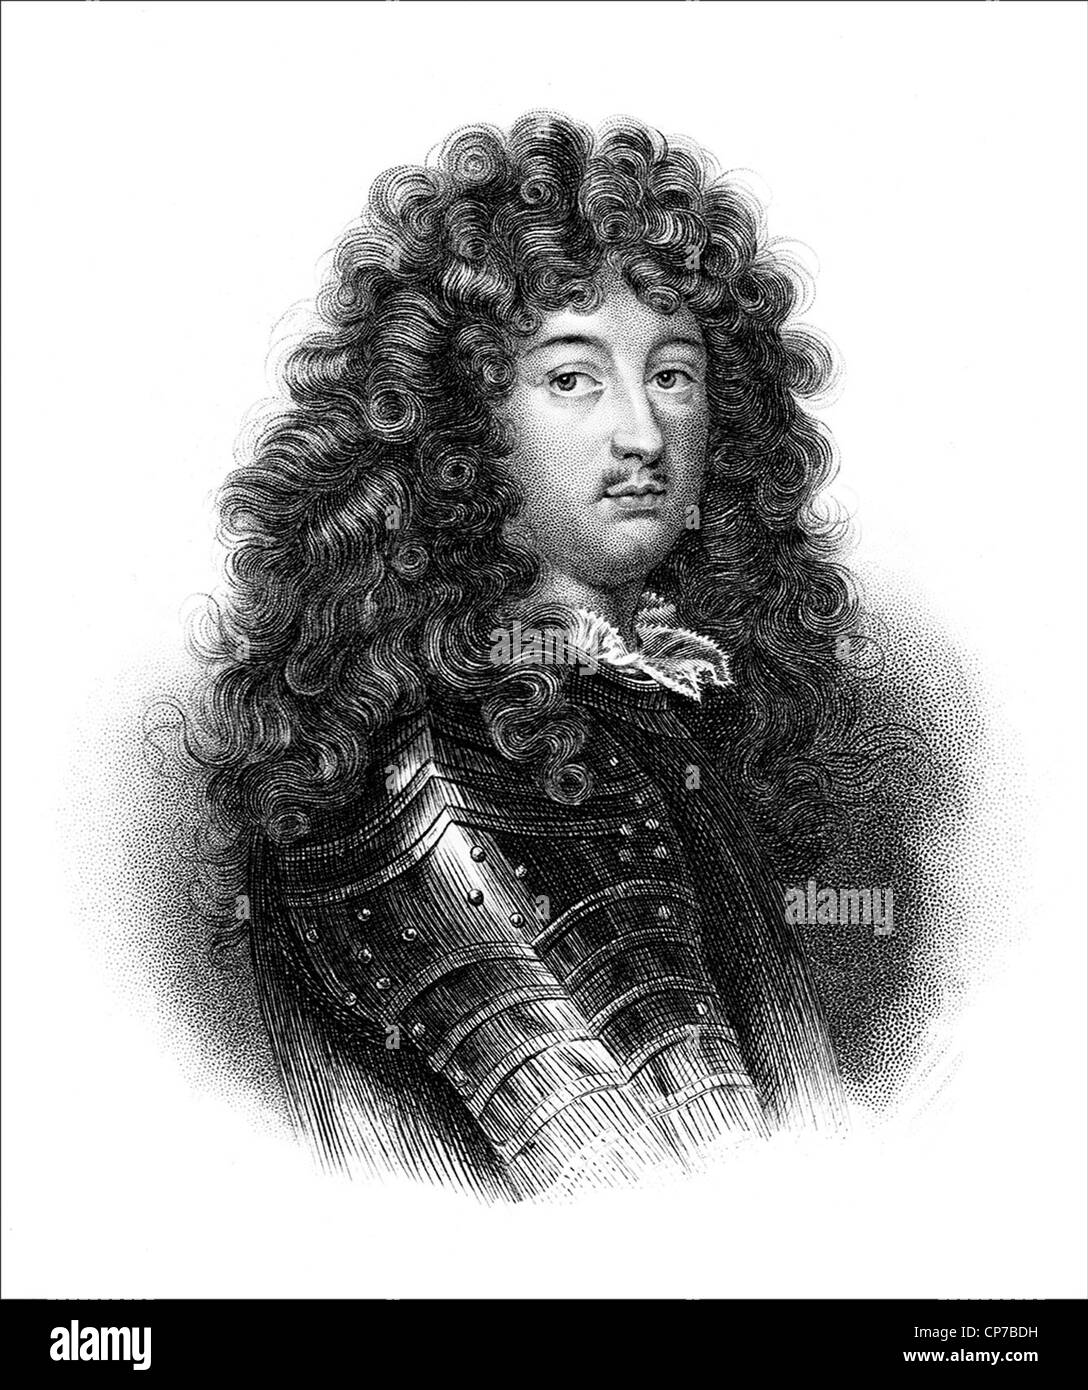 Engraved portrait of King Louis XIV of France. Published in book, The Vicomte of Bragelonne by Alexandre Dumas between 1847-1850 Stock Photo